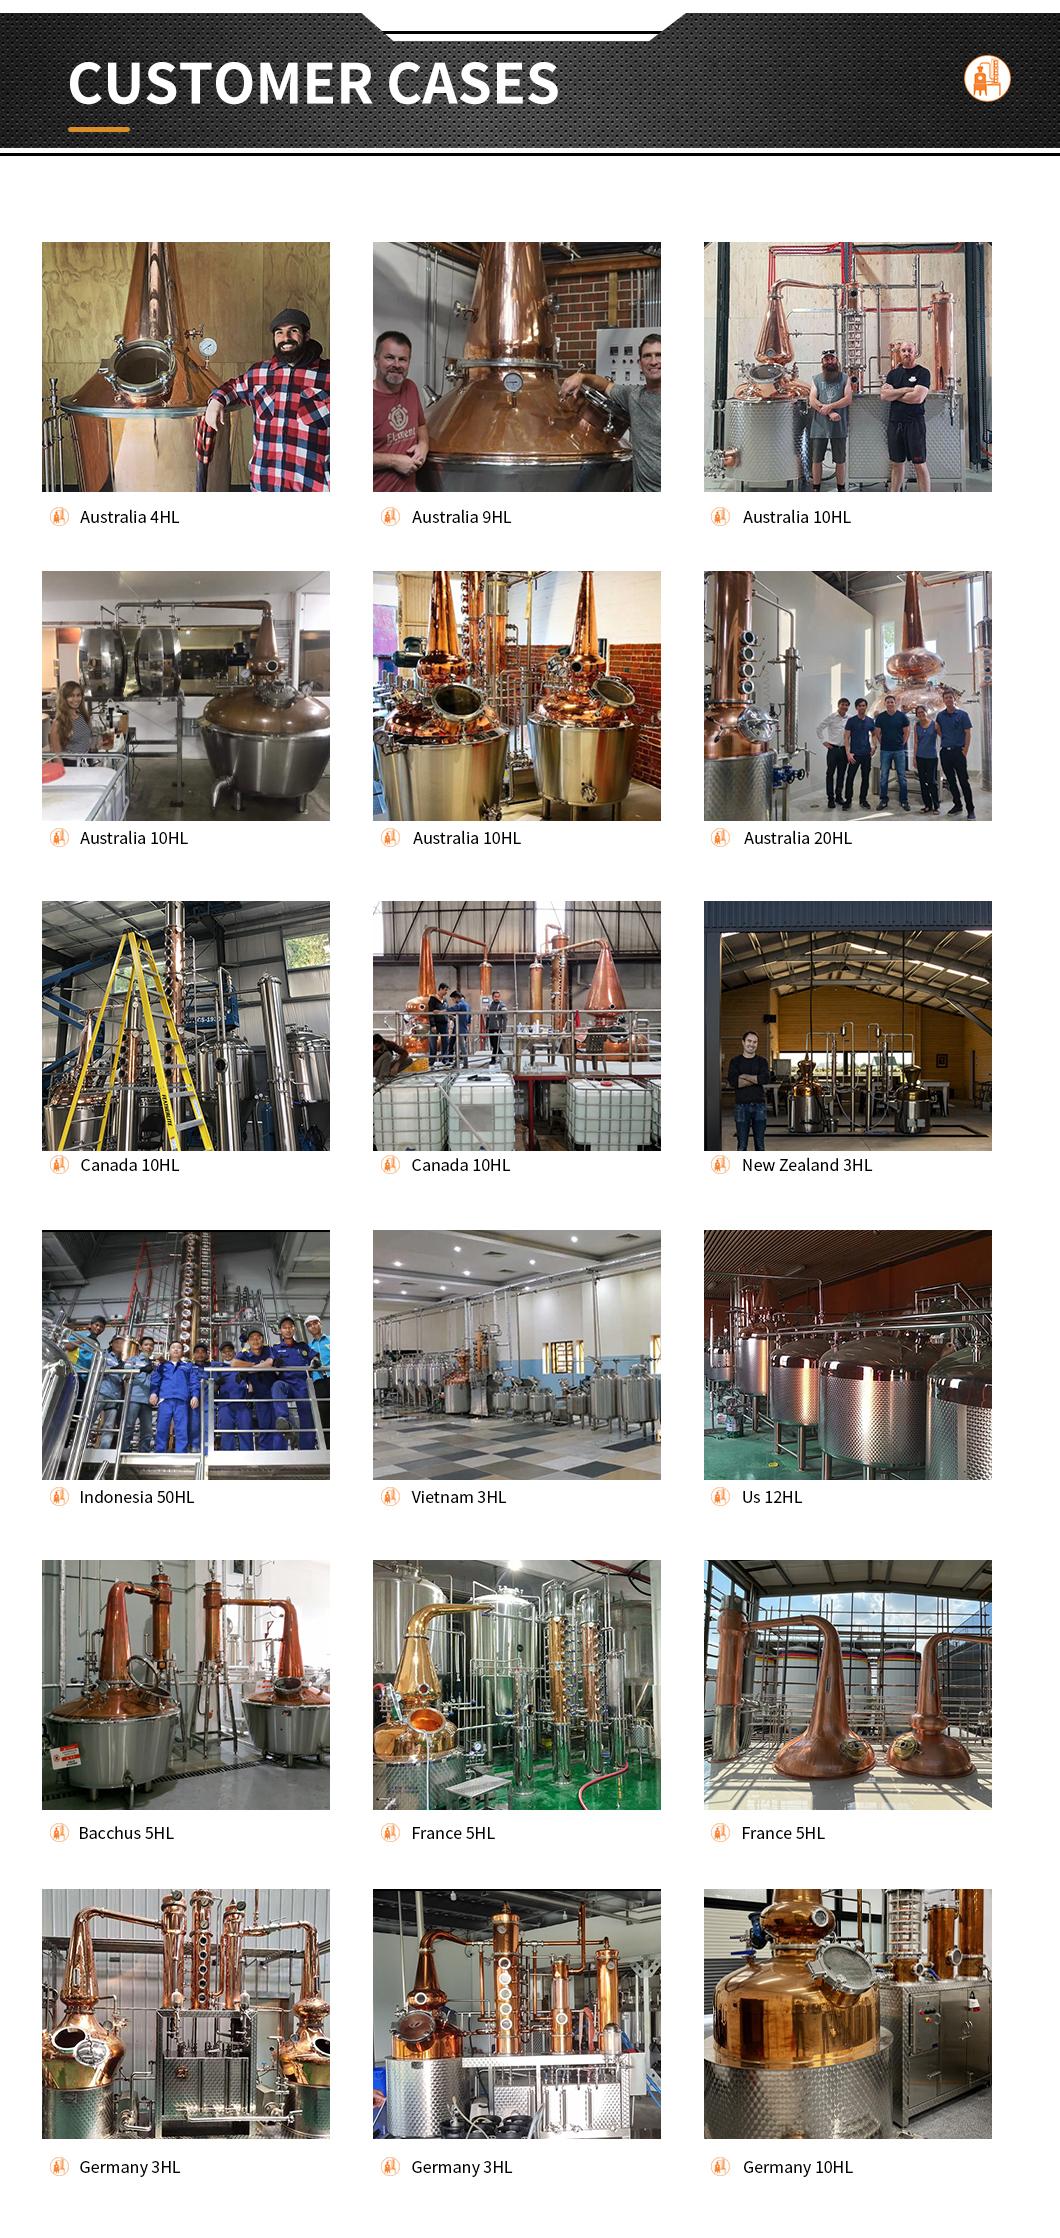 gin distilling equipment,micro distillery equipment, Vodka distillation equipment,alcohol distillation equipment,alcohol distiller machine,vacuum distillation equipment,distilling equipment for beginners,copper distilling equipment,distillation equipment for home